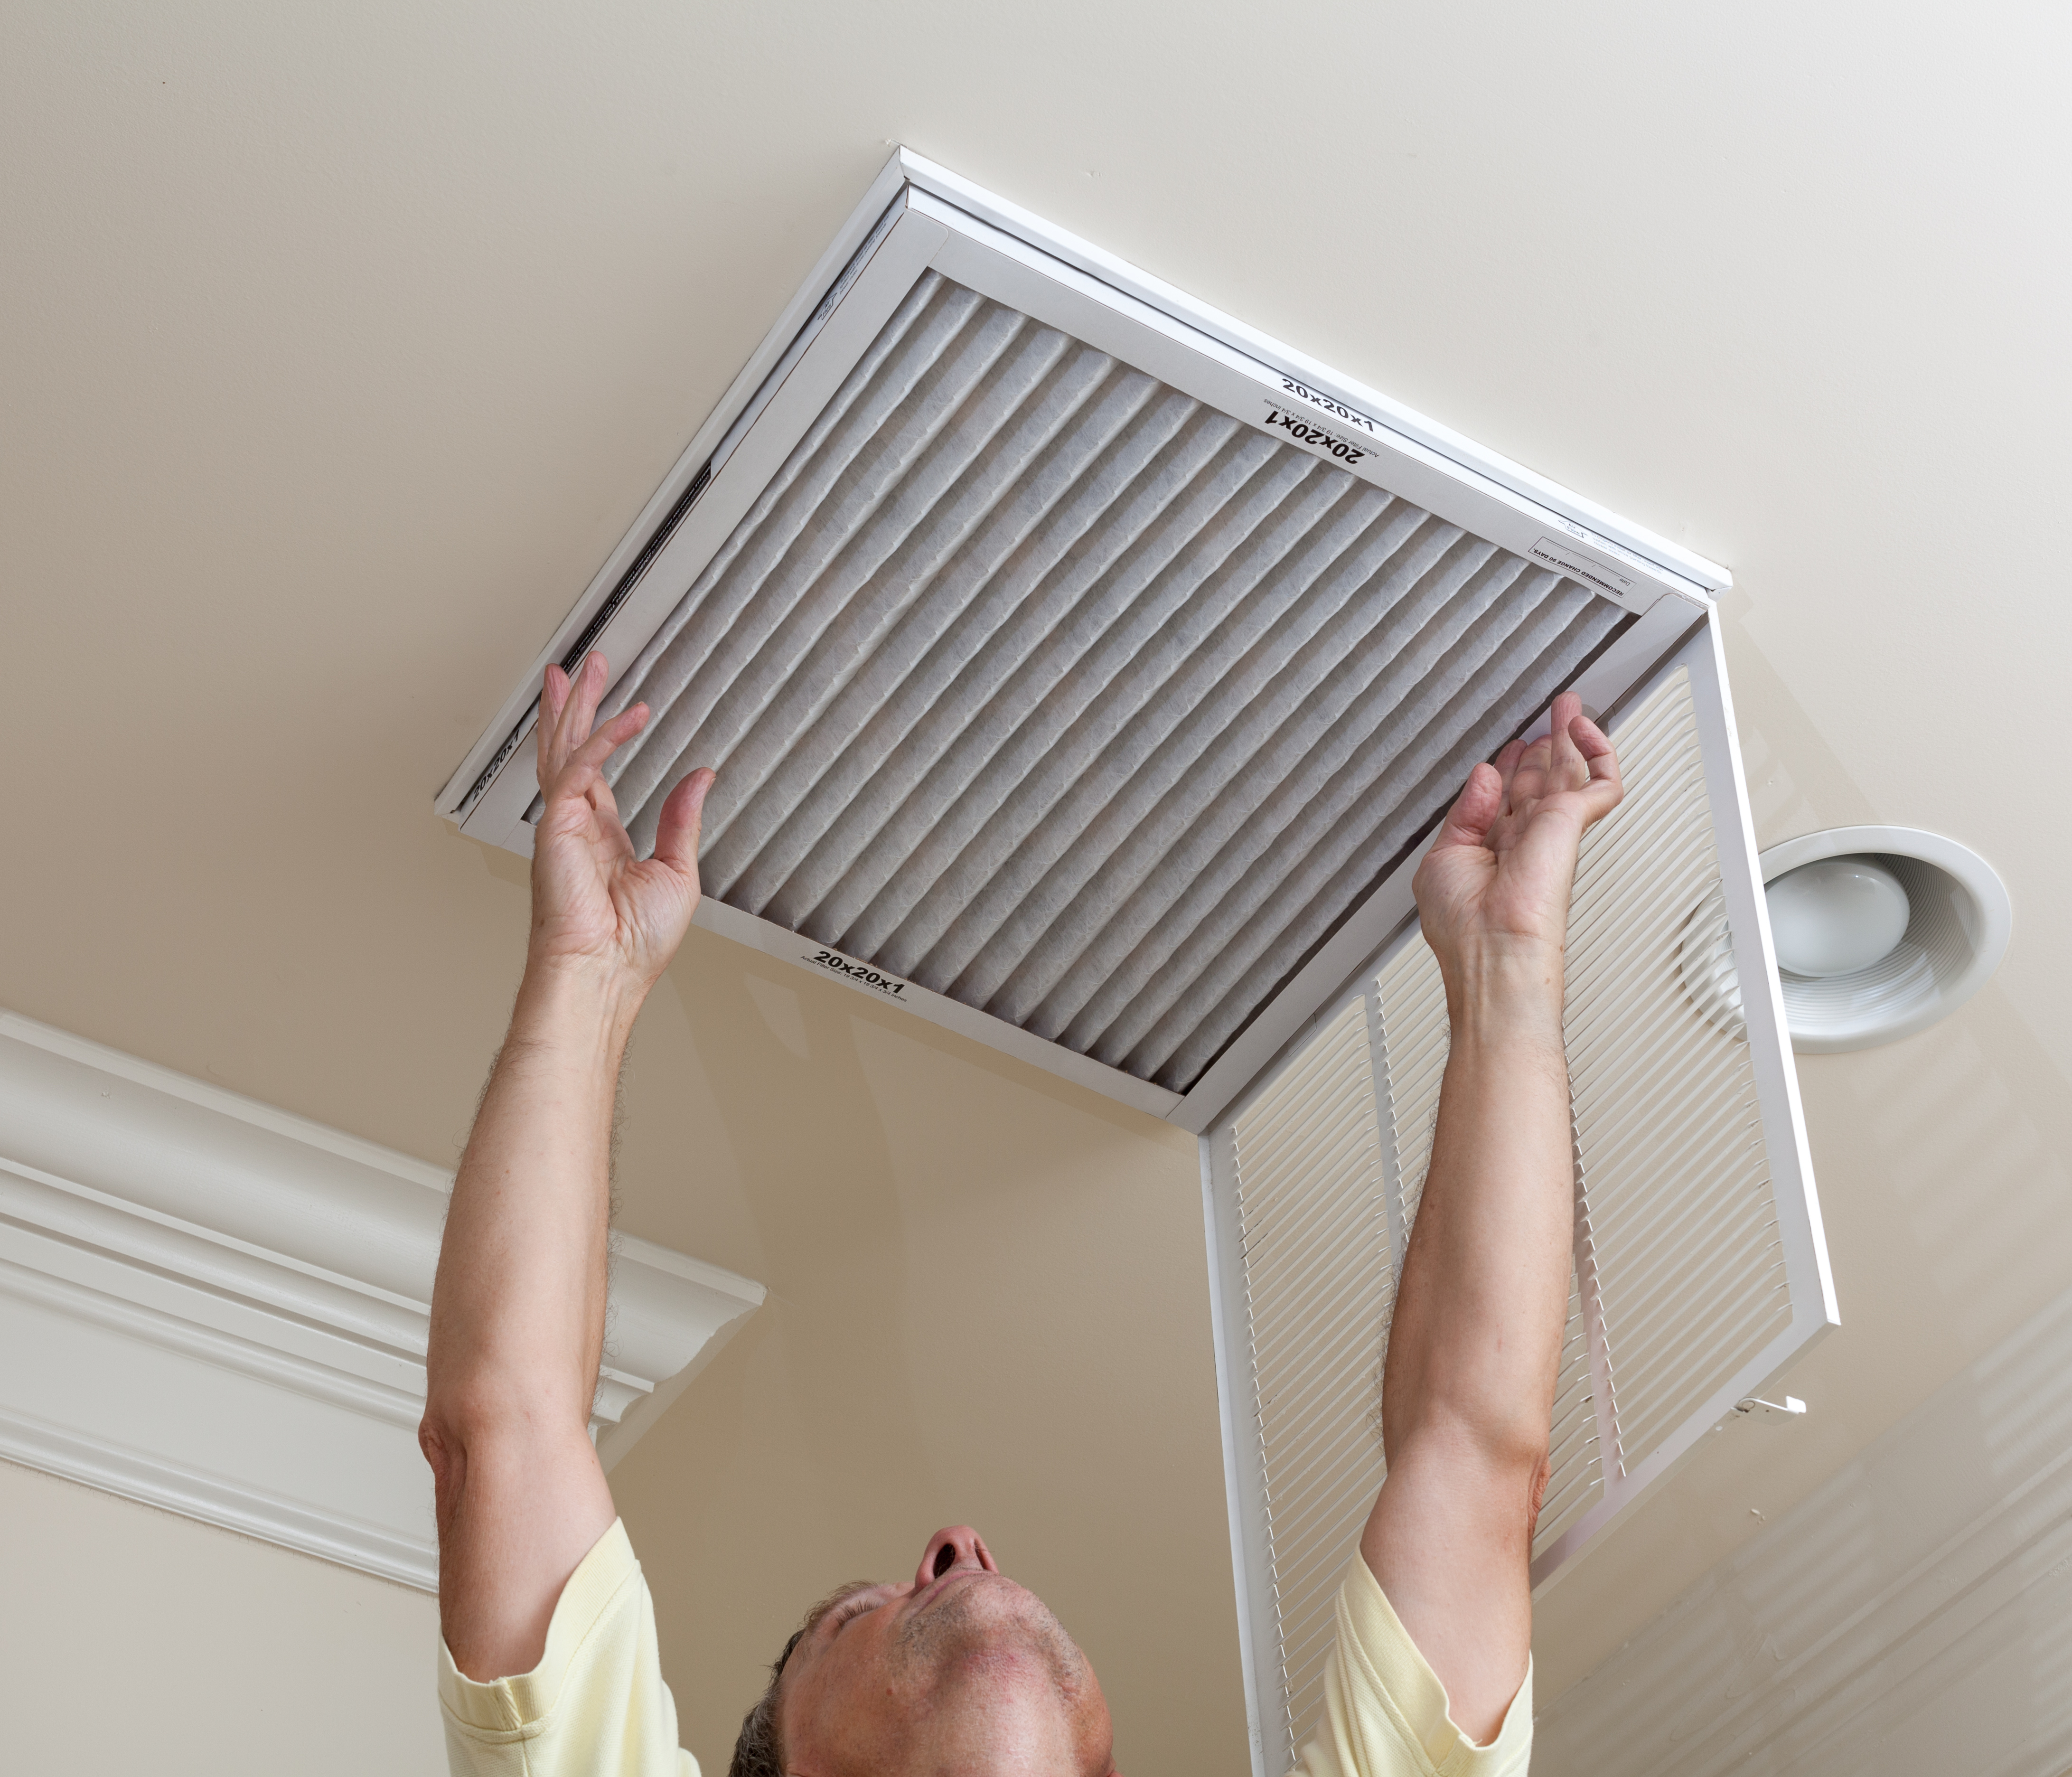 Changing an air conditior filter